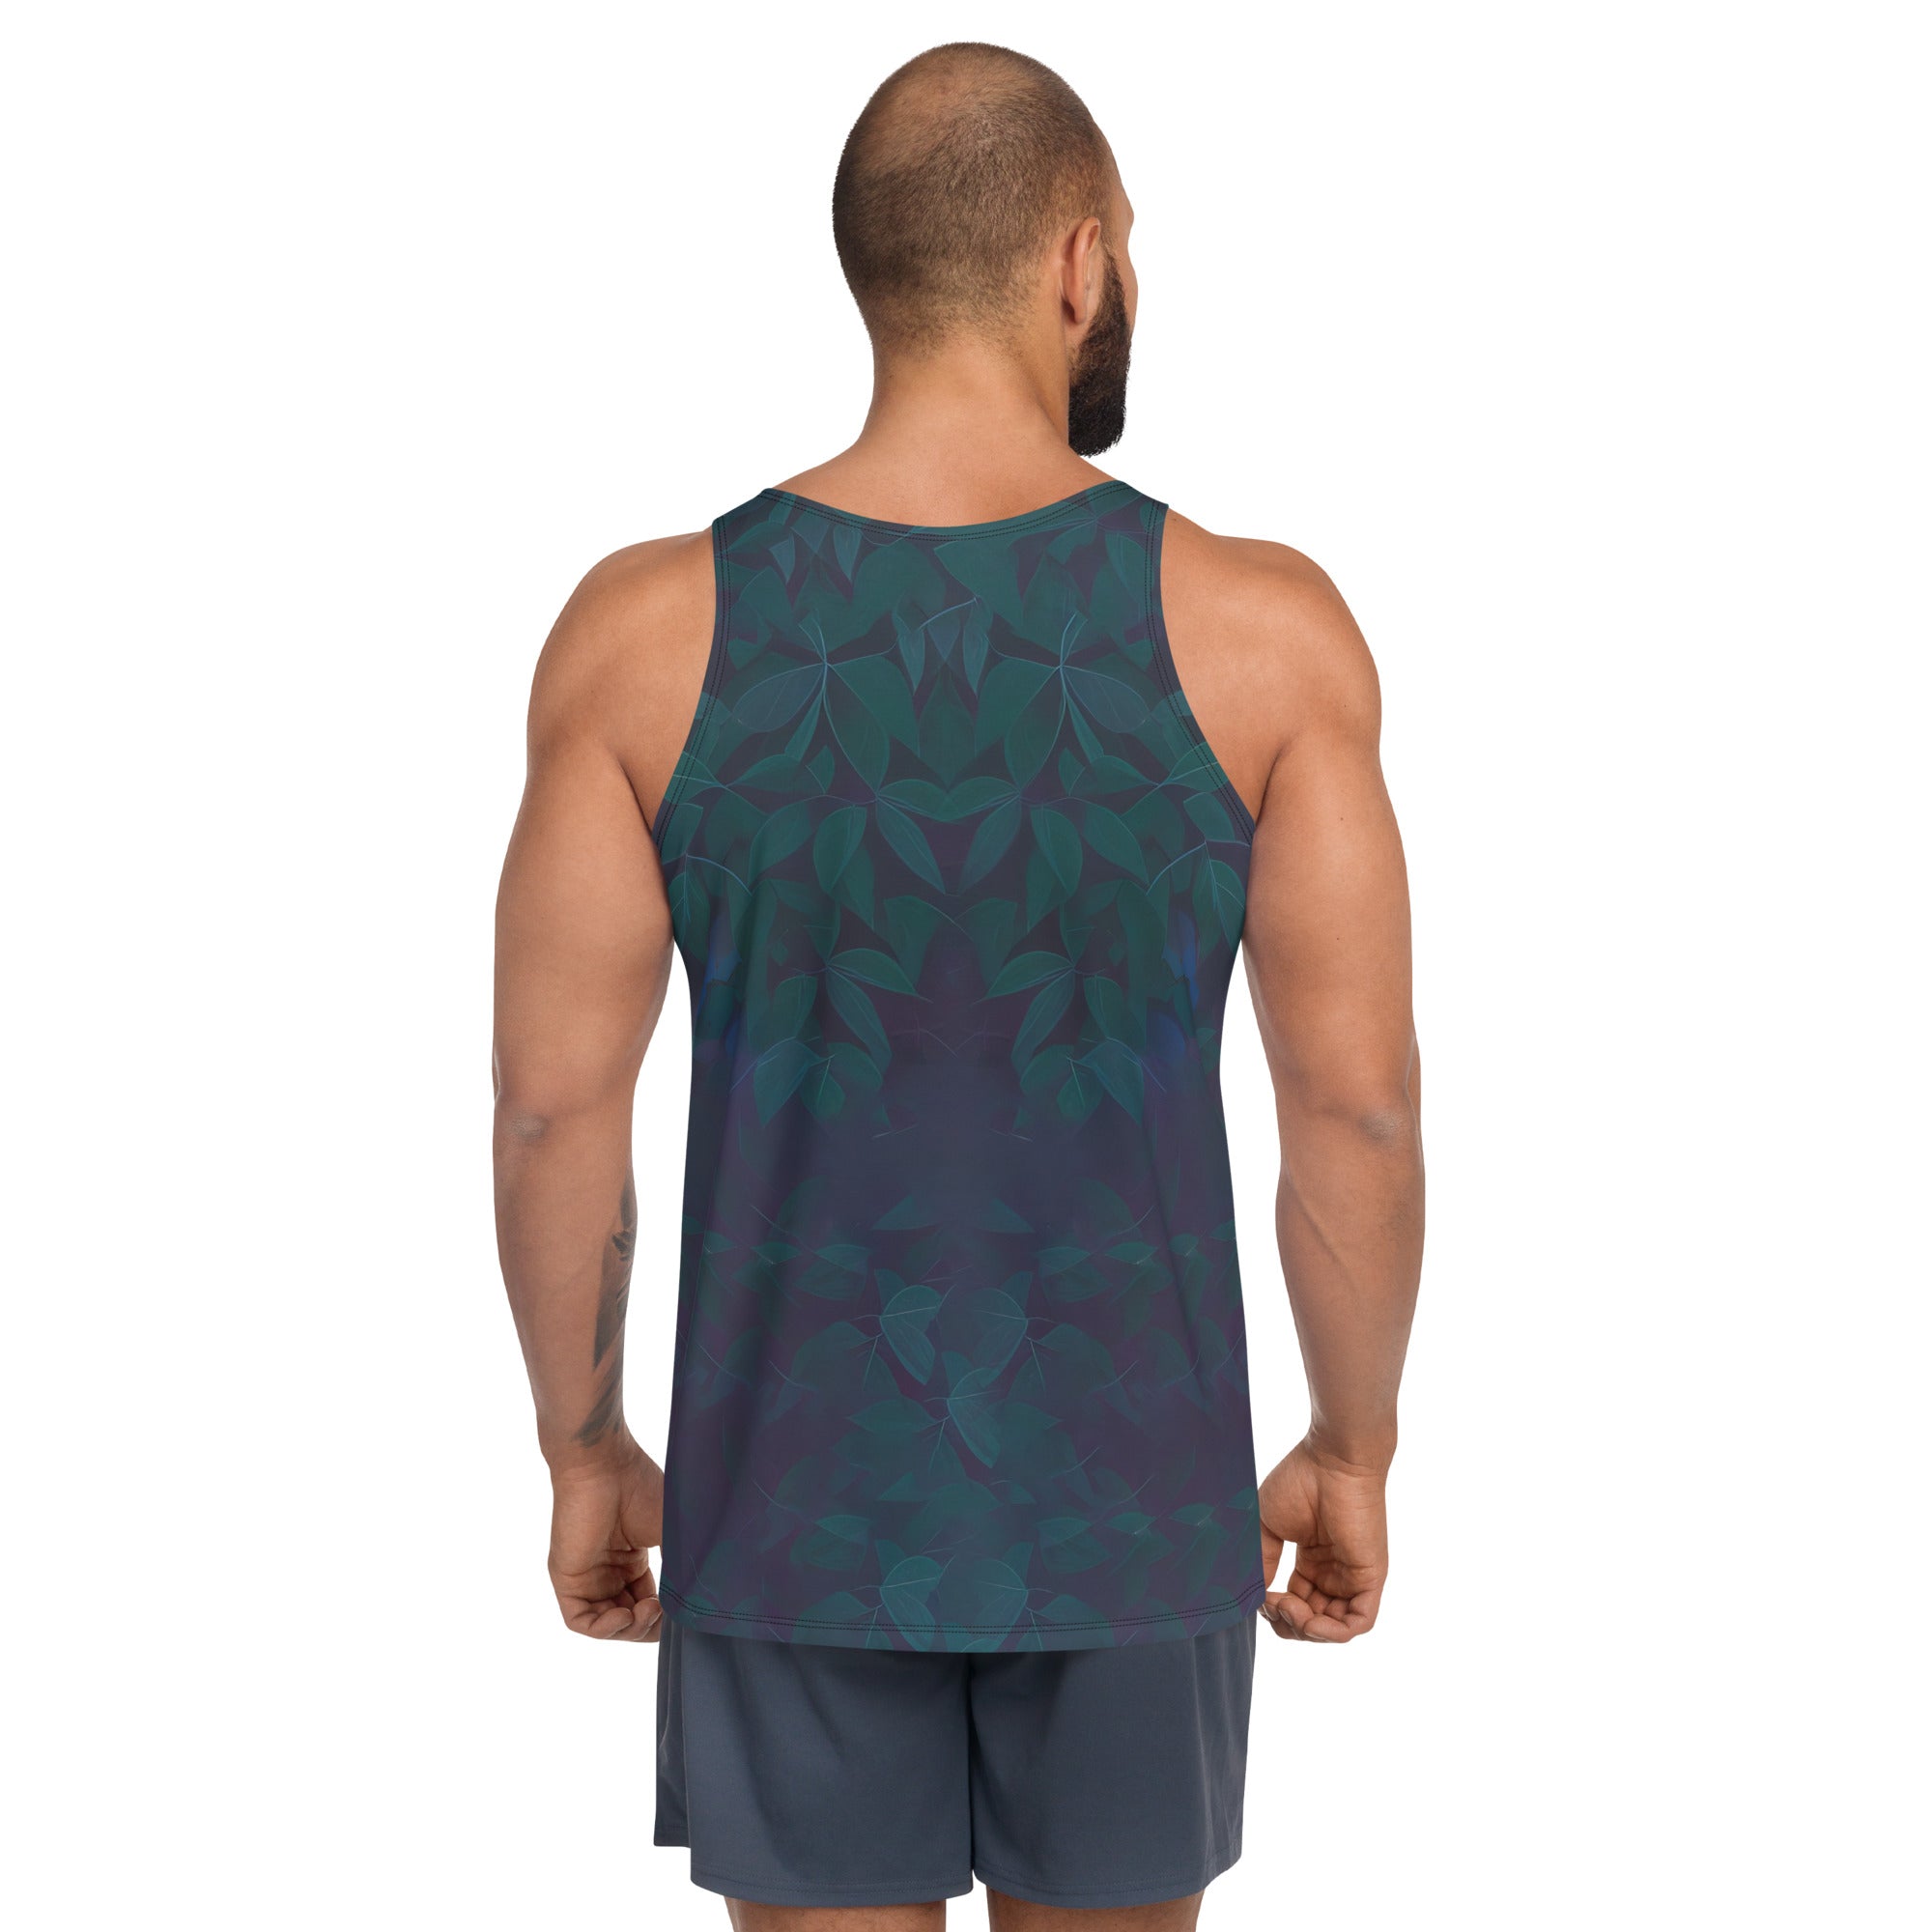 Back view of Beat Harmony Men's Tank Top hanging neatly.